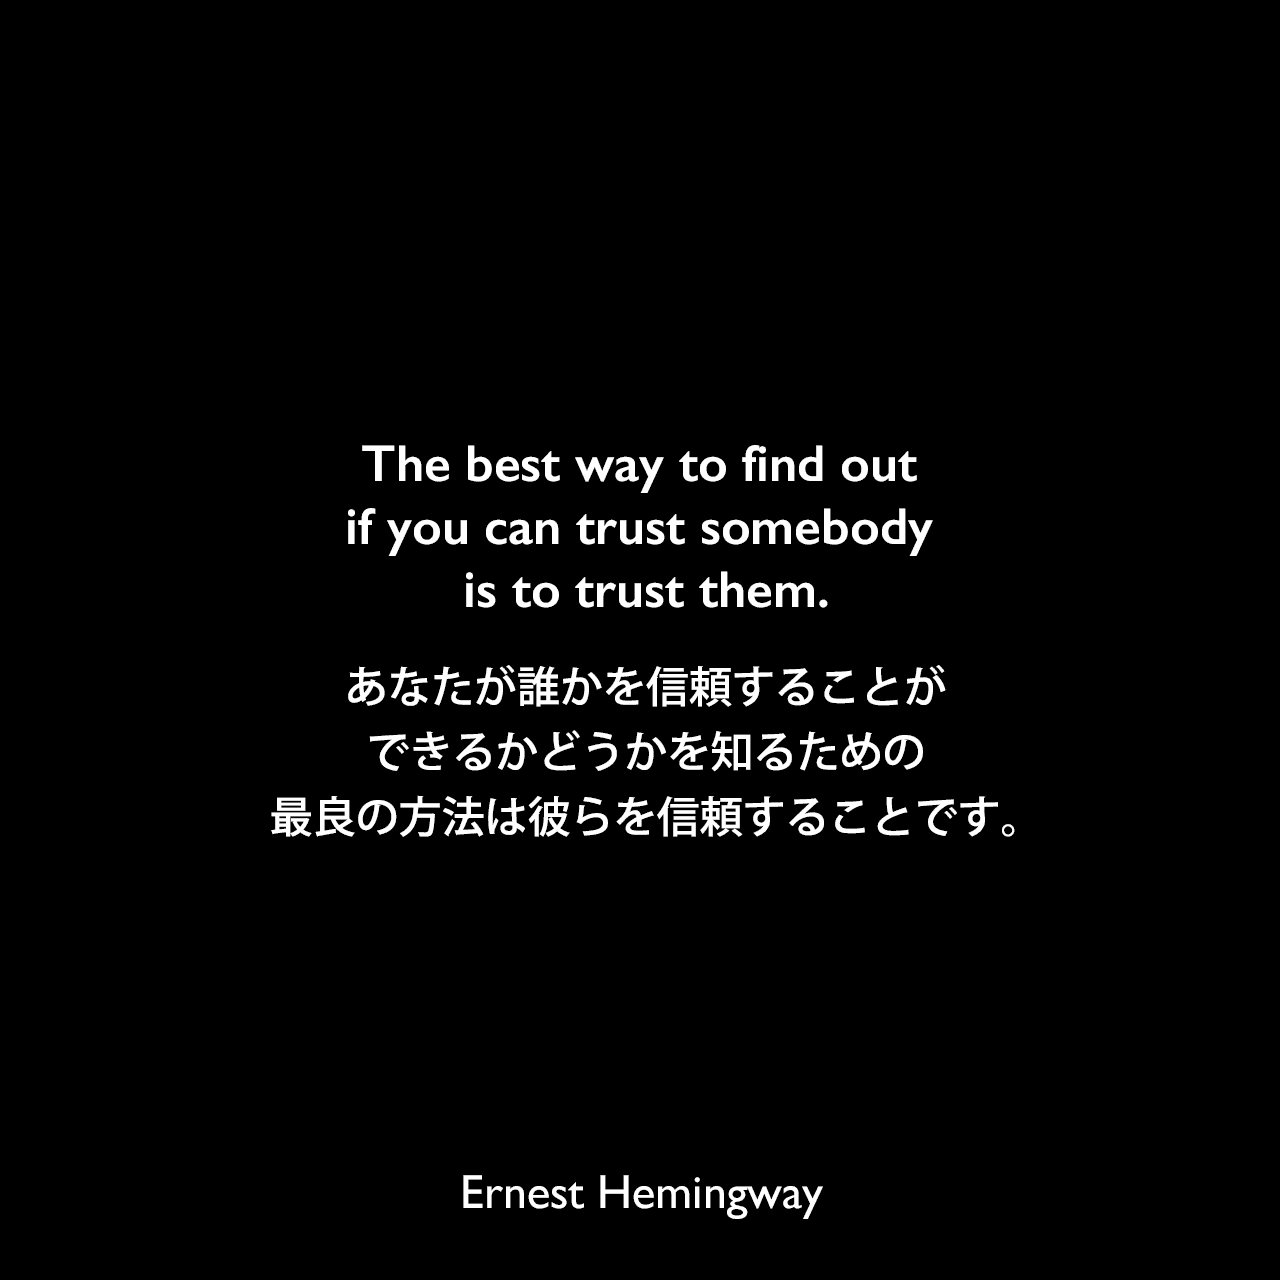 The best way to find out if you can trust somebody is to trust them.あなたが、誰かを信頼することができるかどうかを知るための、最良の方法は彼らを信頼することです。